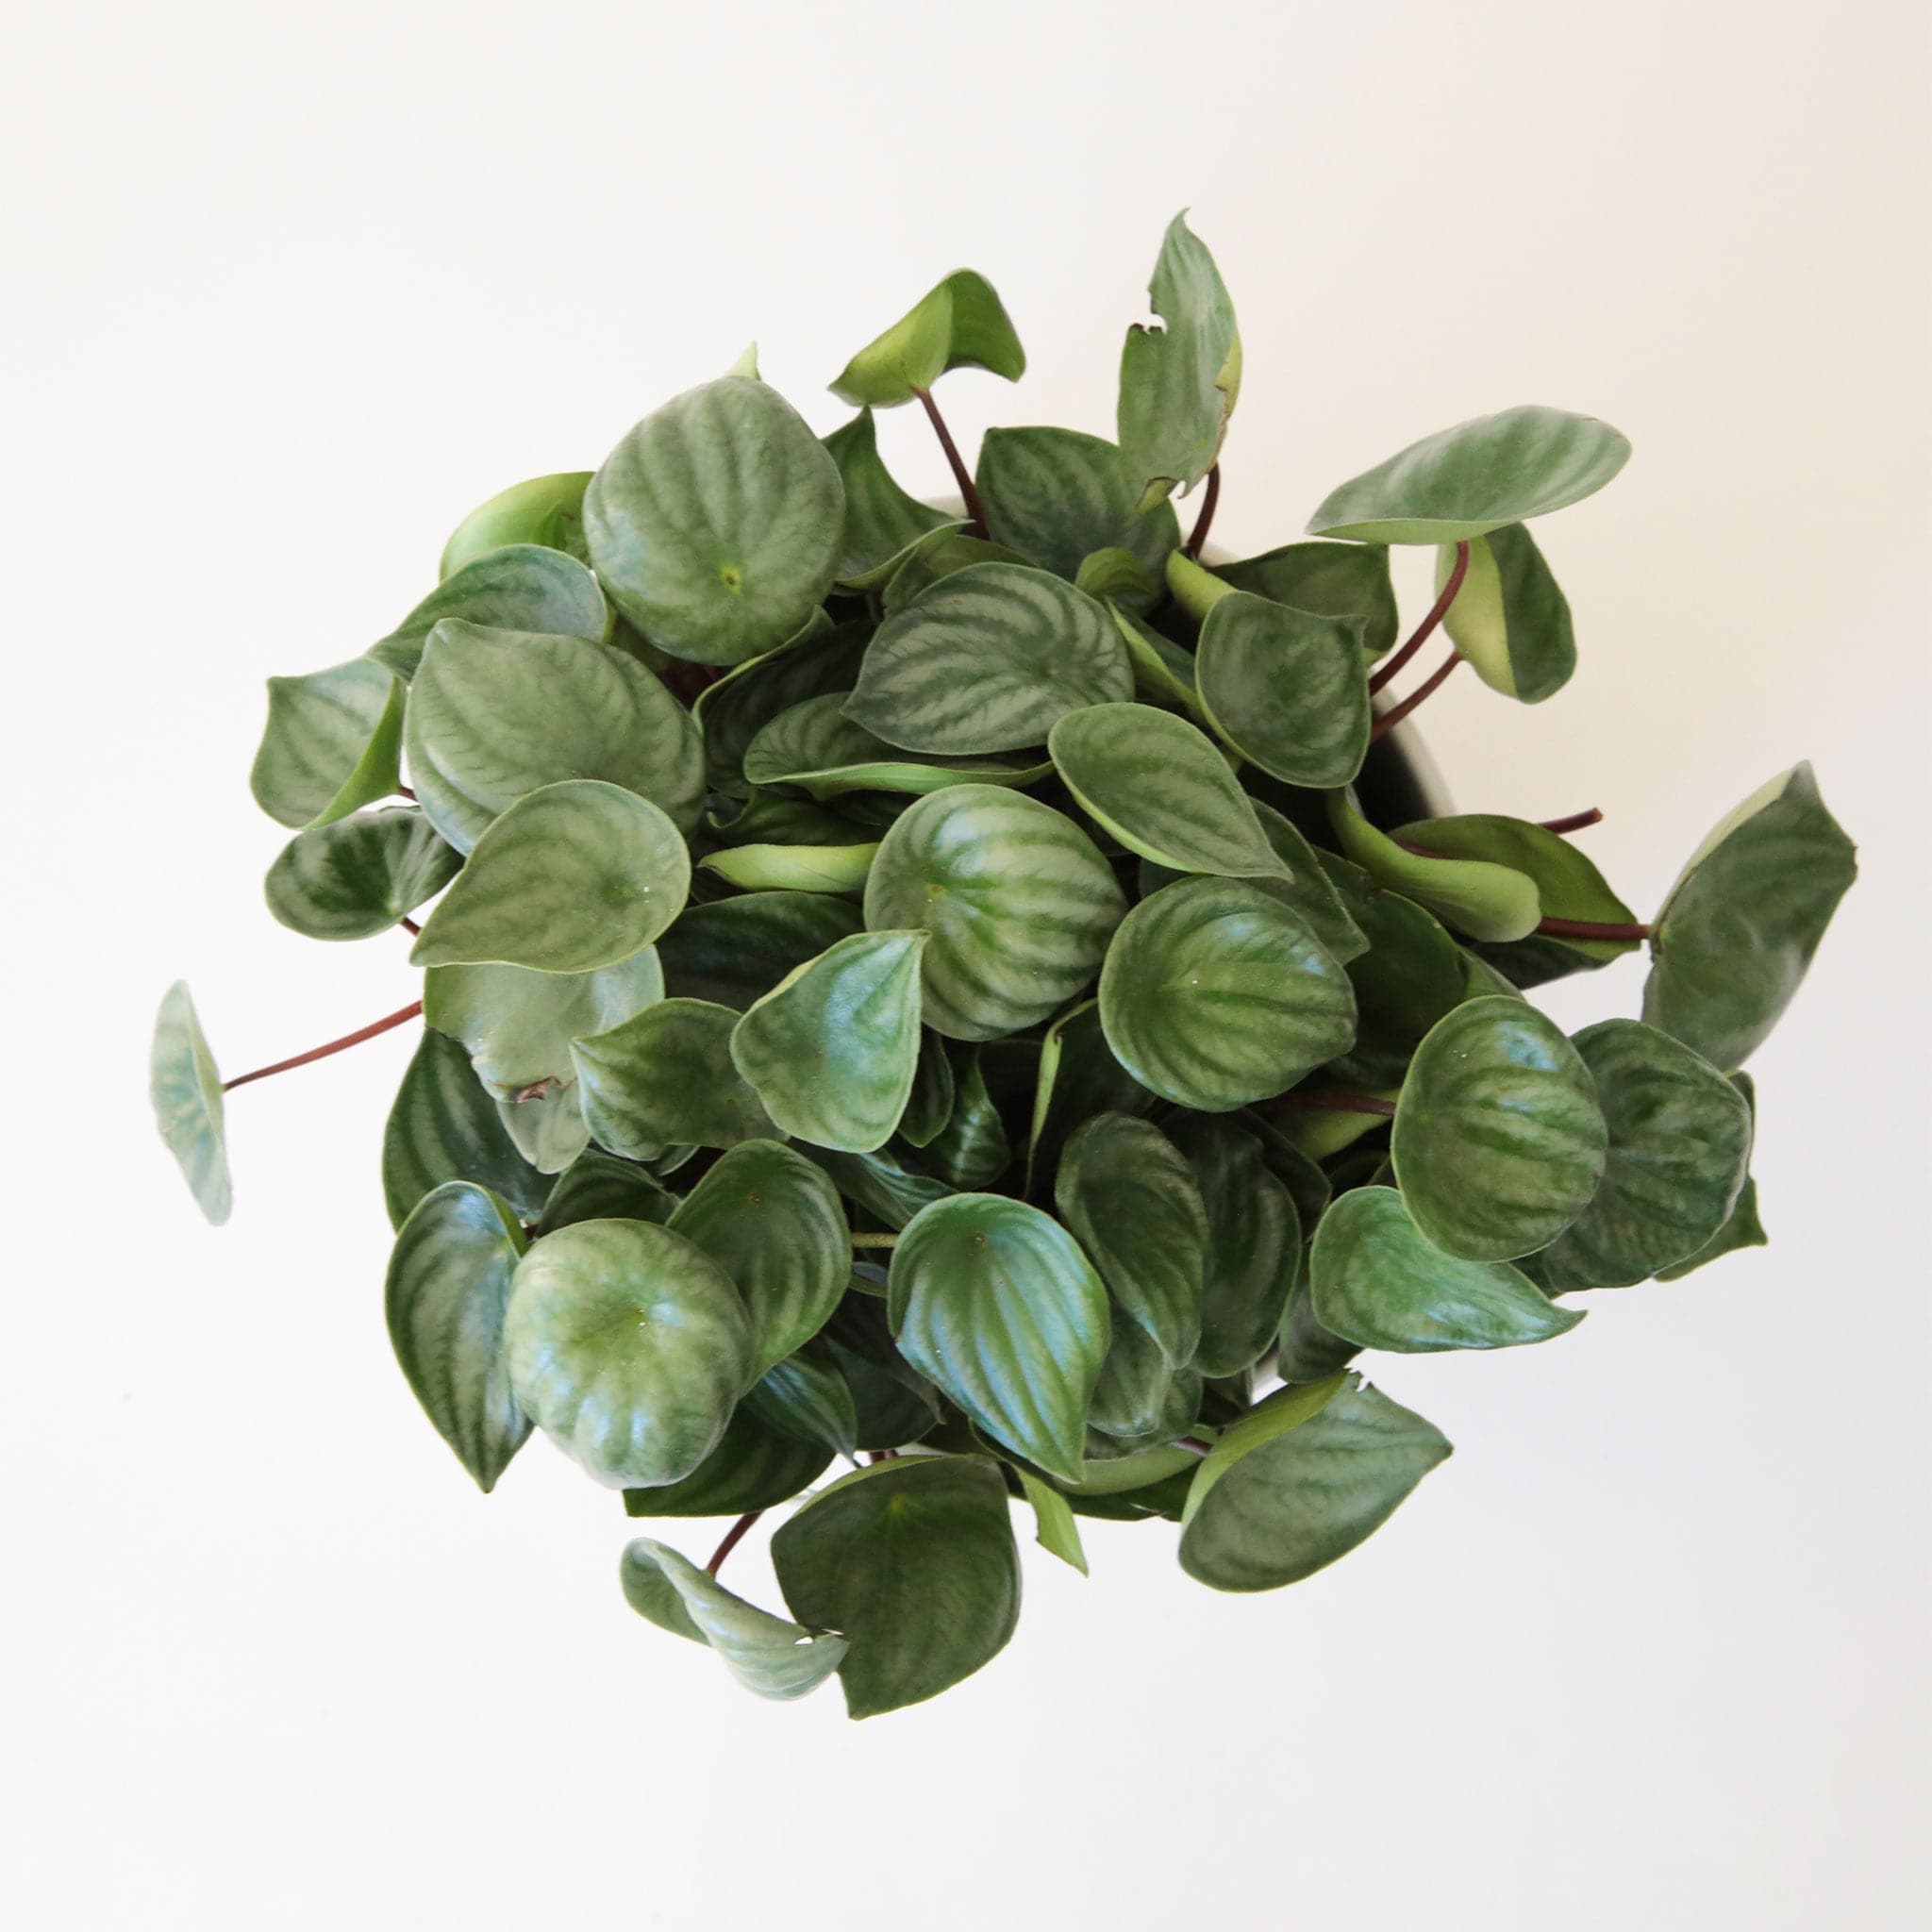 a peperomia watermelon with dark red stems and small green leaves with a silvery green pattern similar to a watermelon.